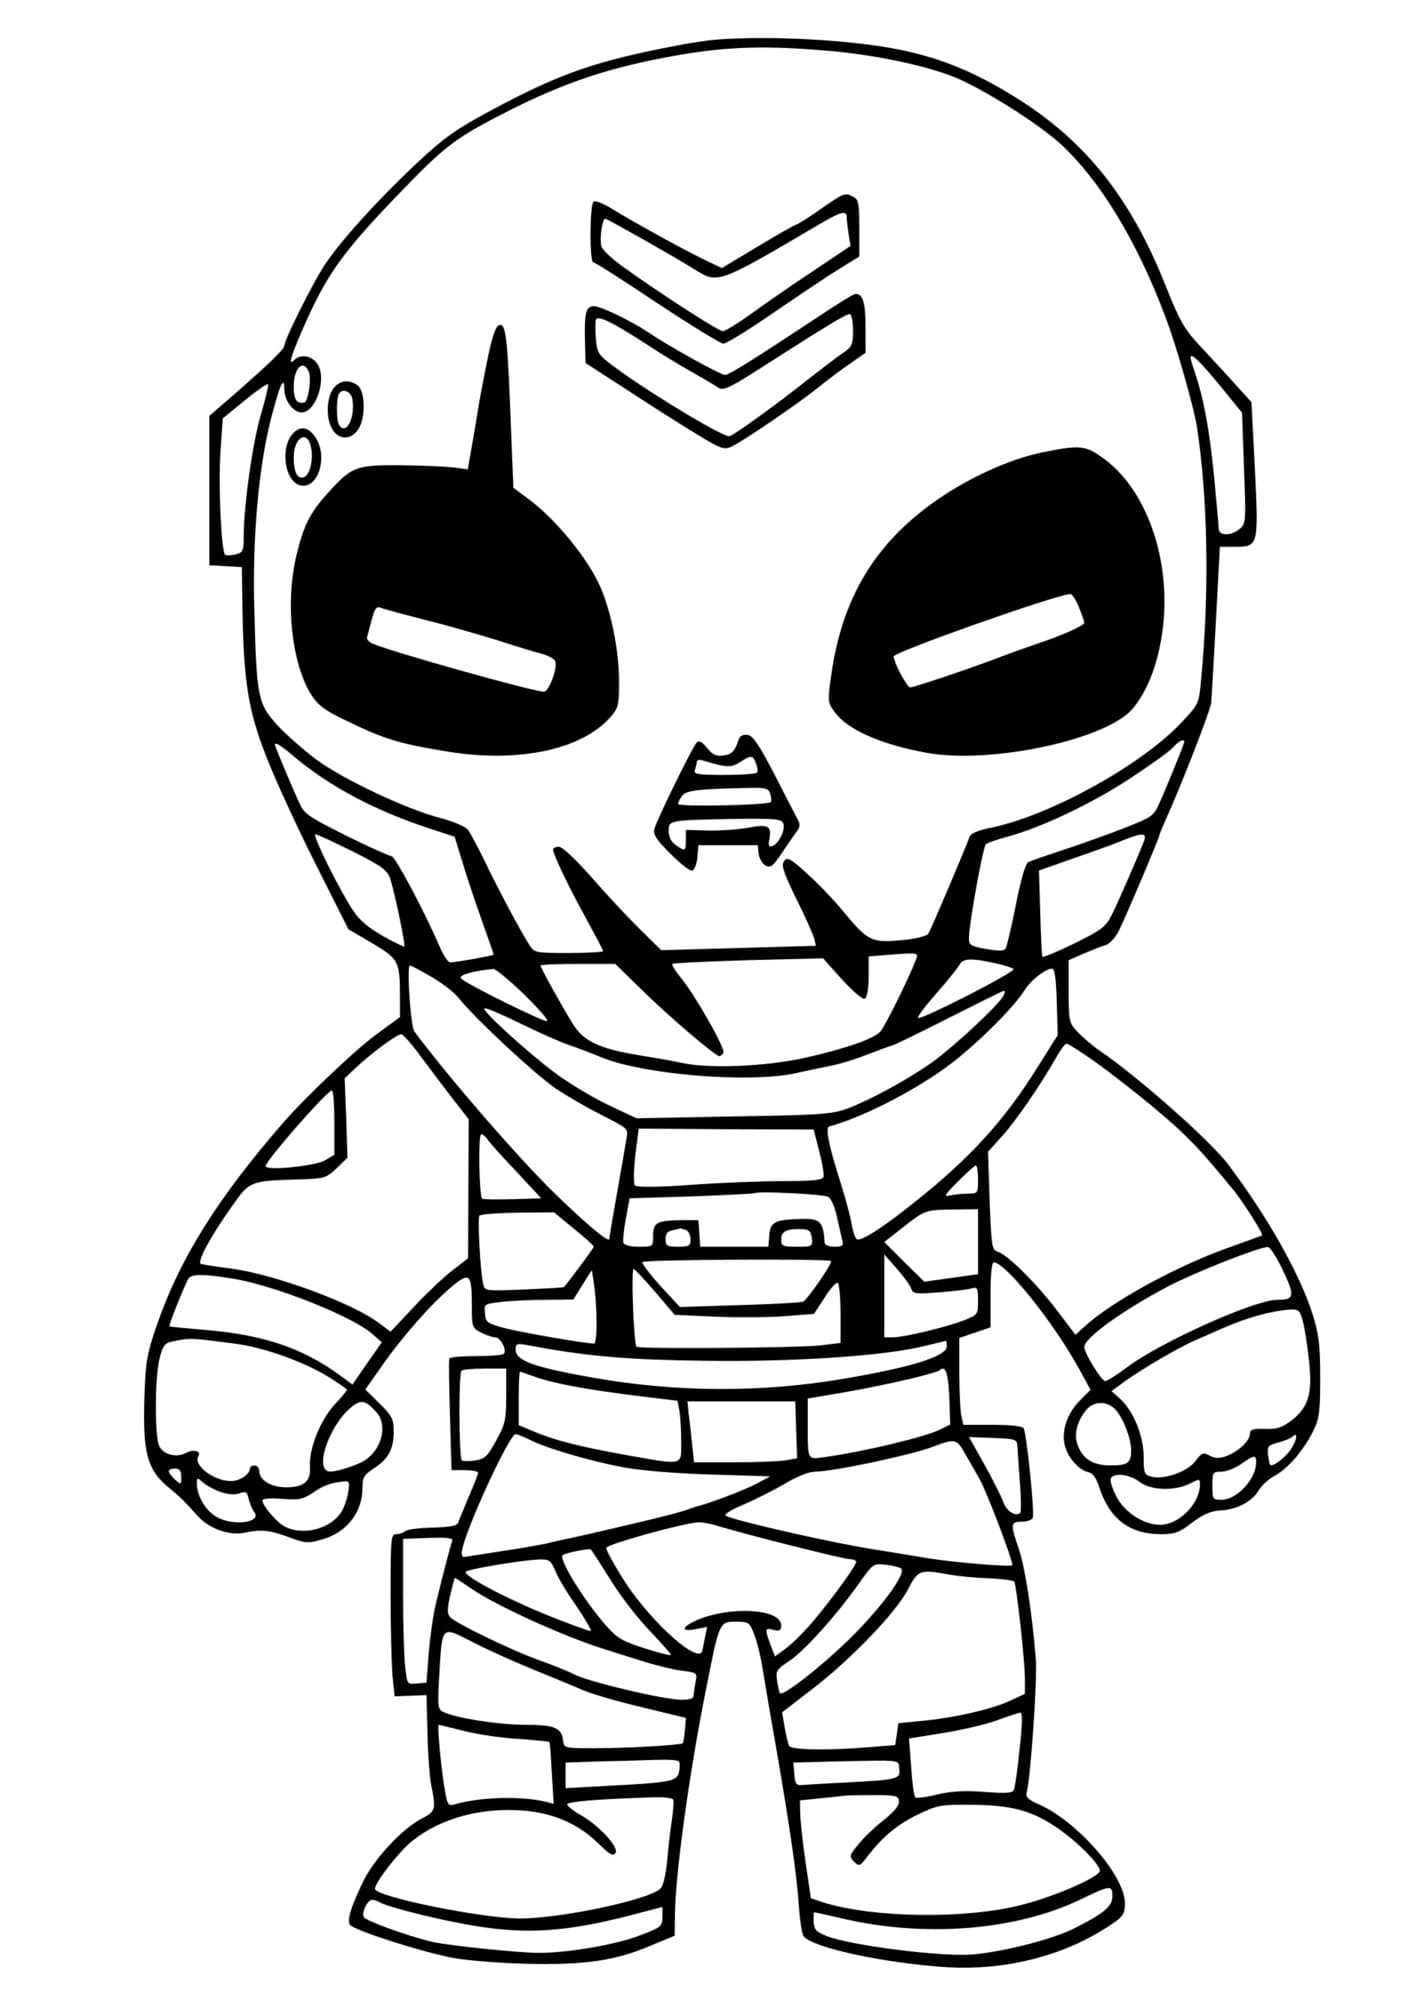 Metal Mouth Fortnite Coloring Page